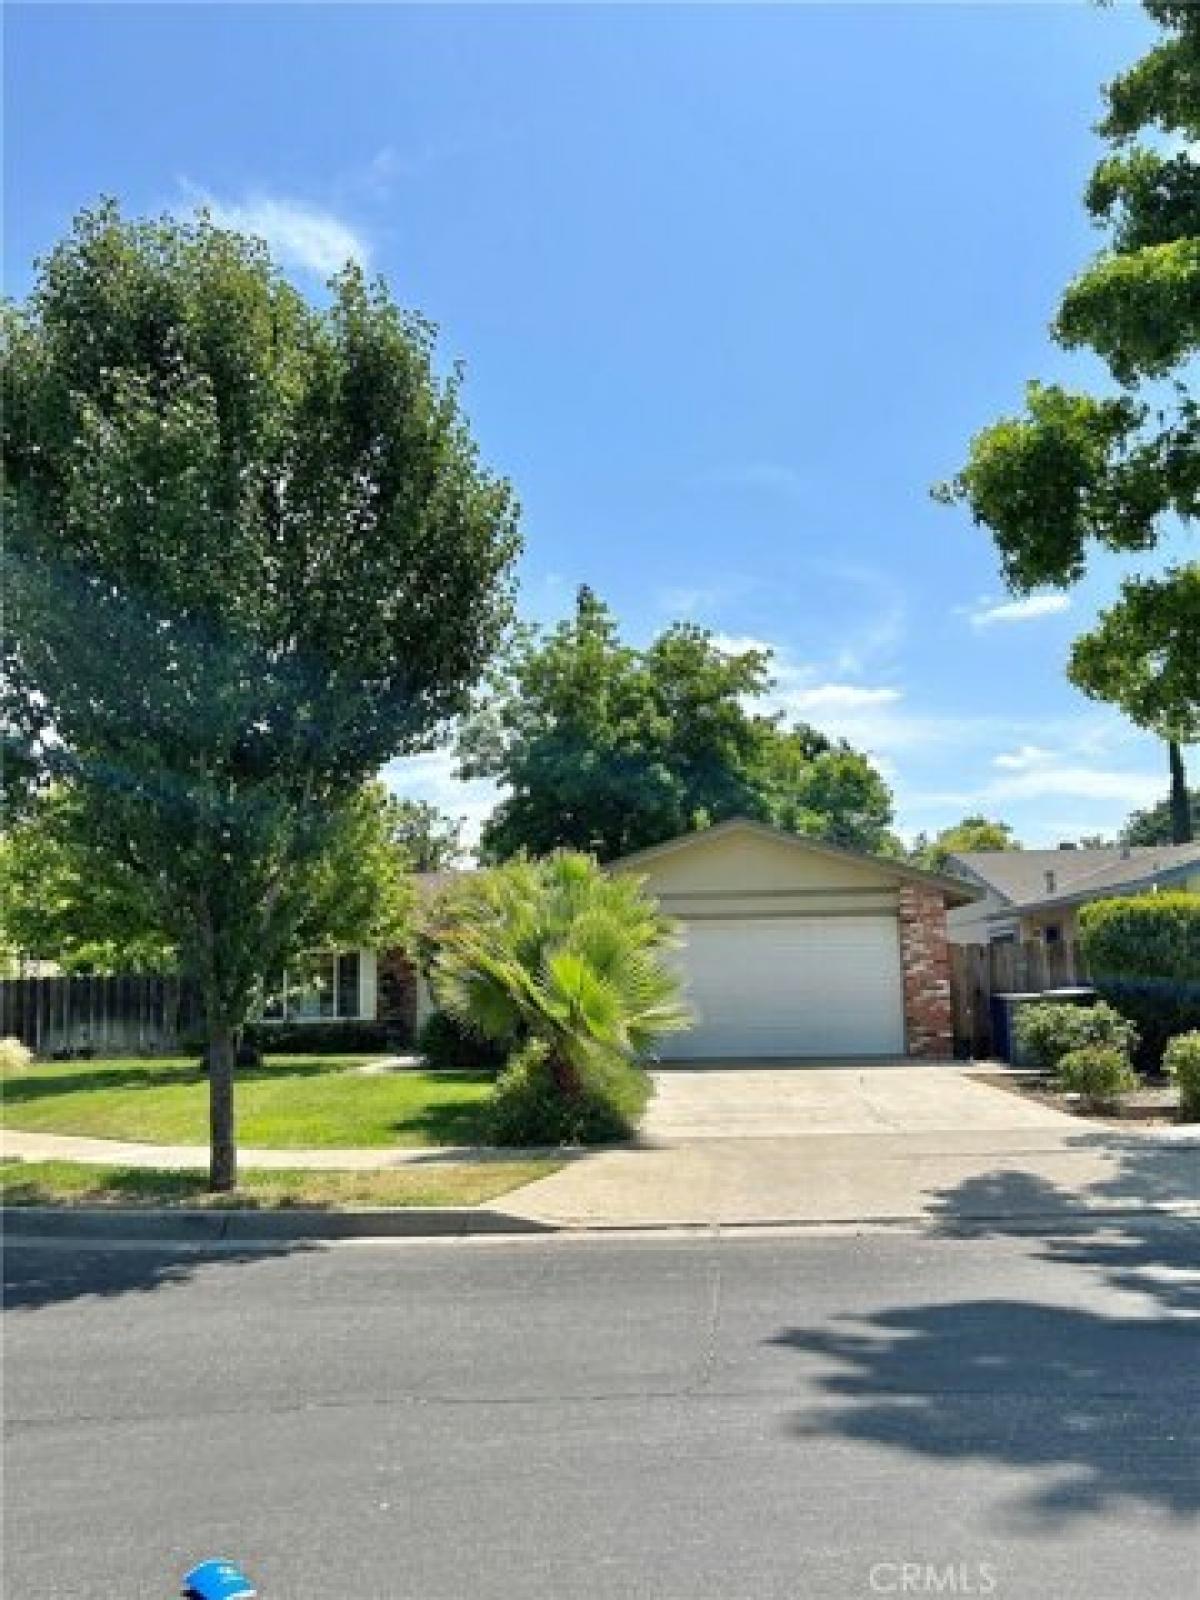 Picture of Home For Sale in Merced, California, United States